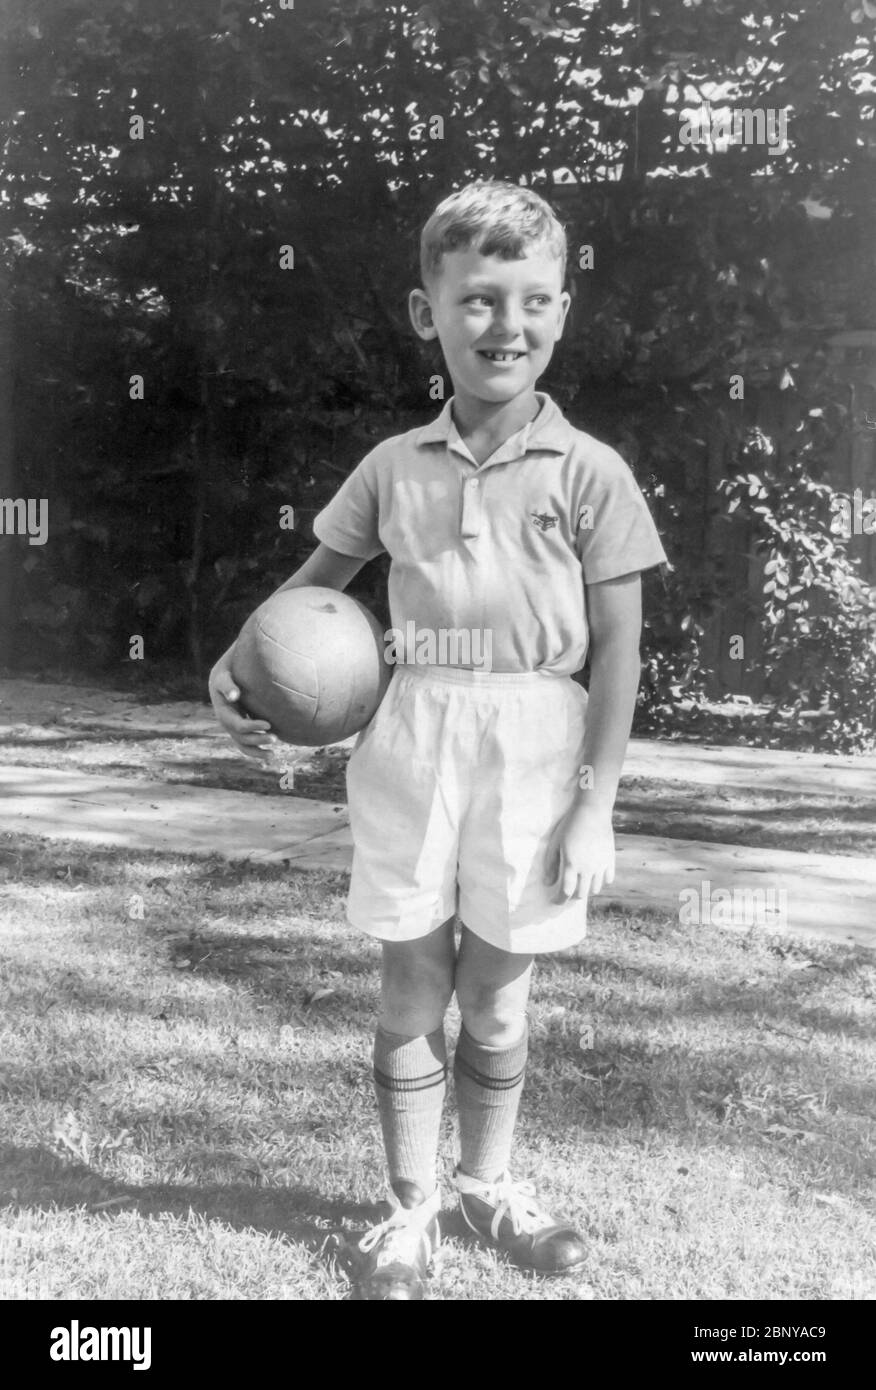 Sydney Australia 1966: A young Australian 6 year old boy stands in his Soccer outfit with a football in the backyard of his Sydney home. There is no uniform evident and it is likely that this boy was headed for pre season trials. Stock Photo